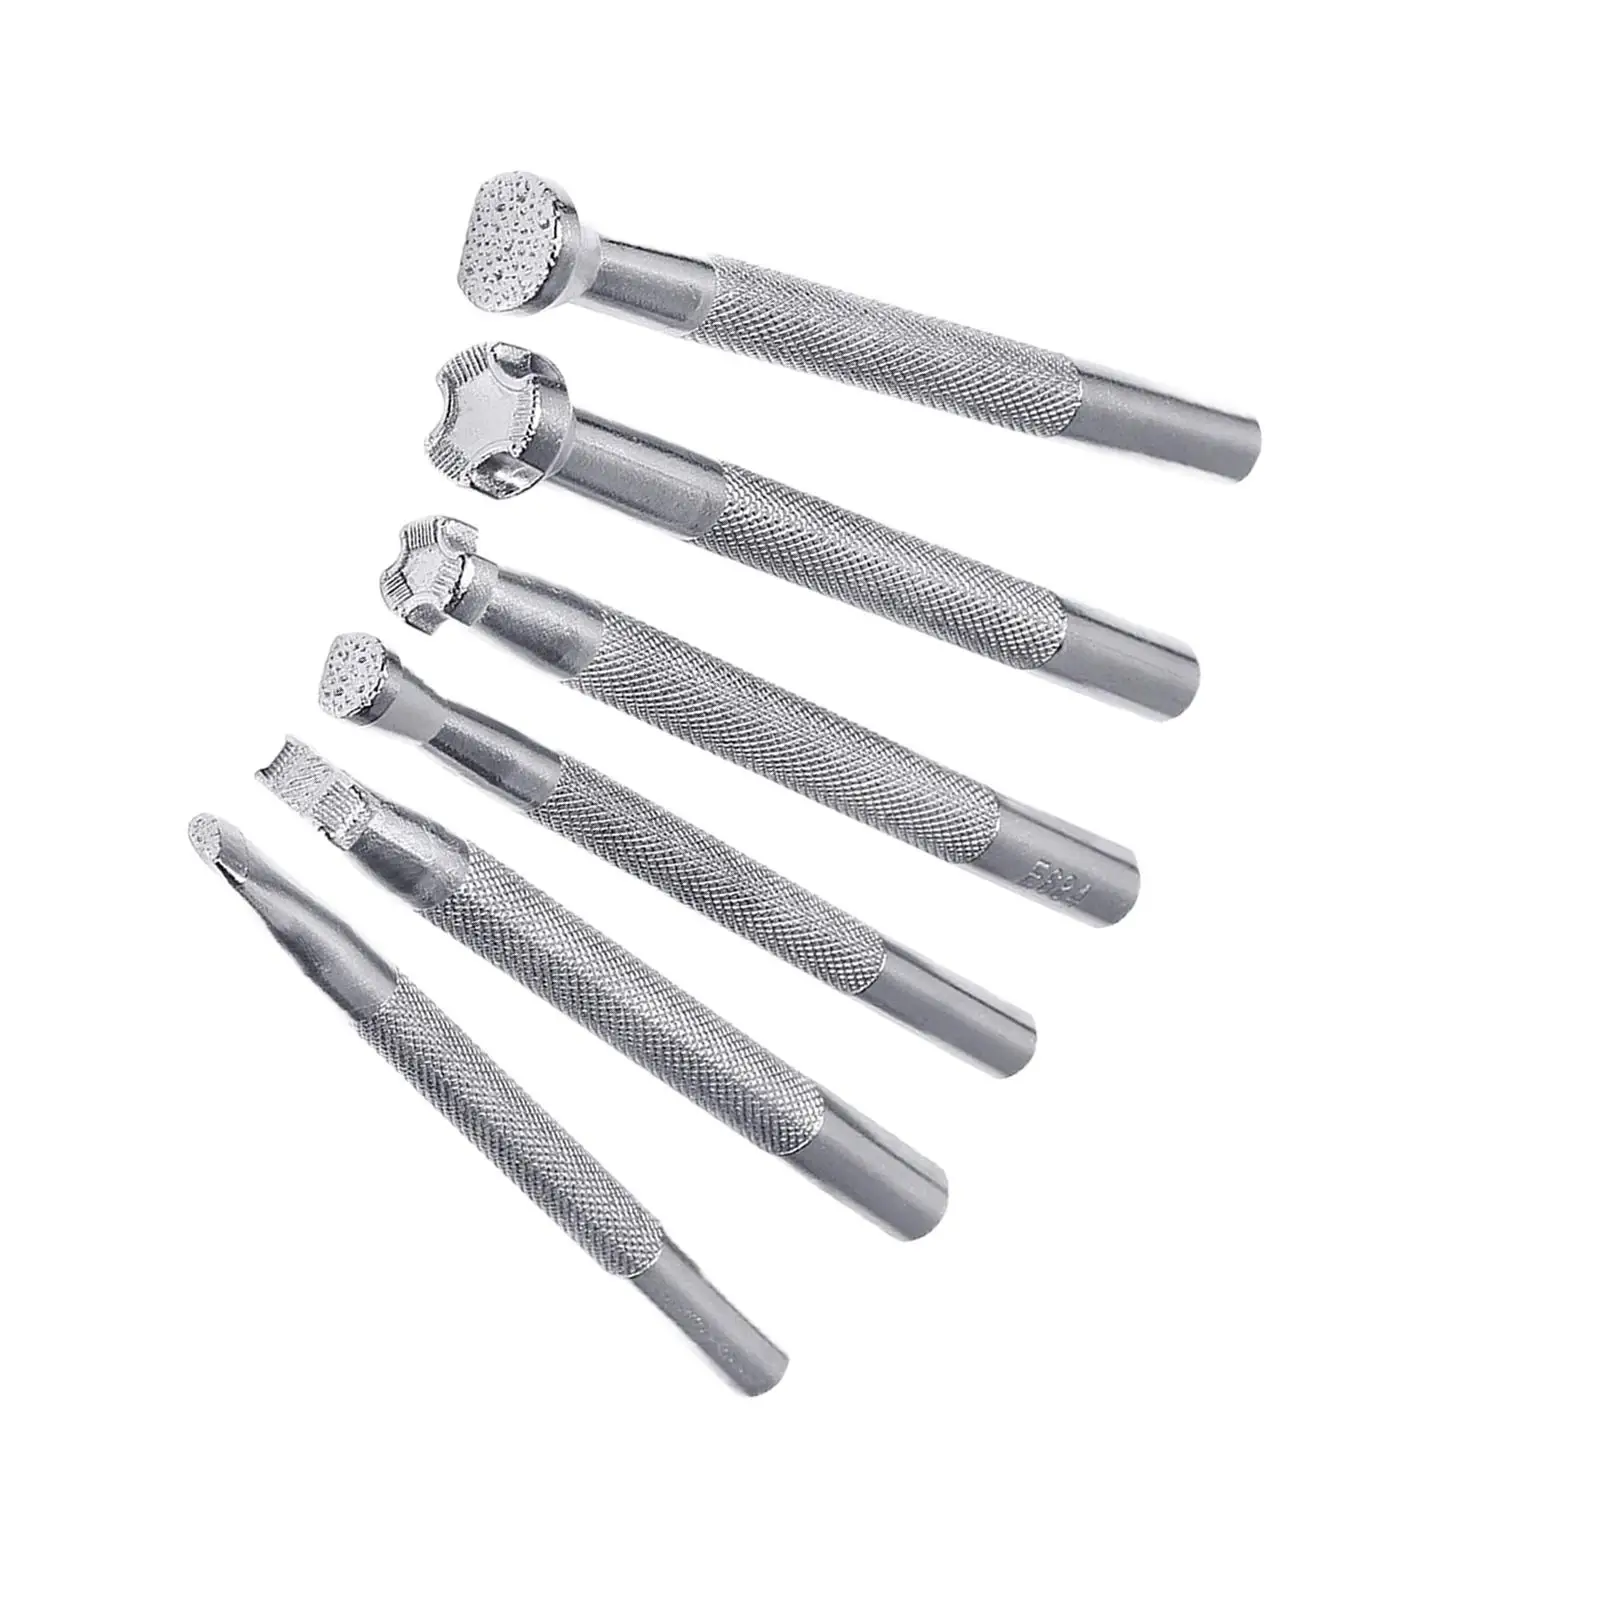 Set of 6 Alloy Leather Stamping Printing Tools for Craft DIY Art